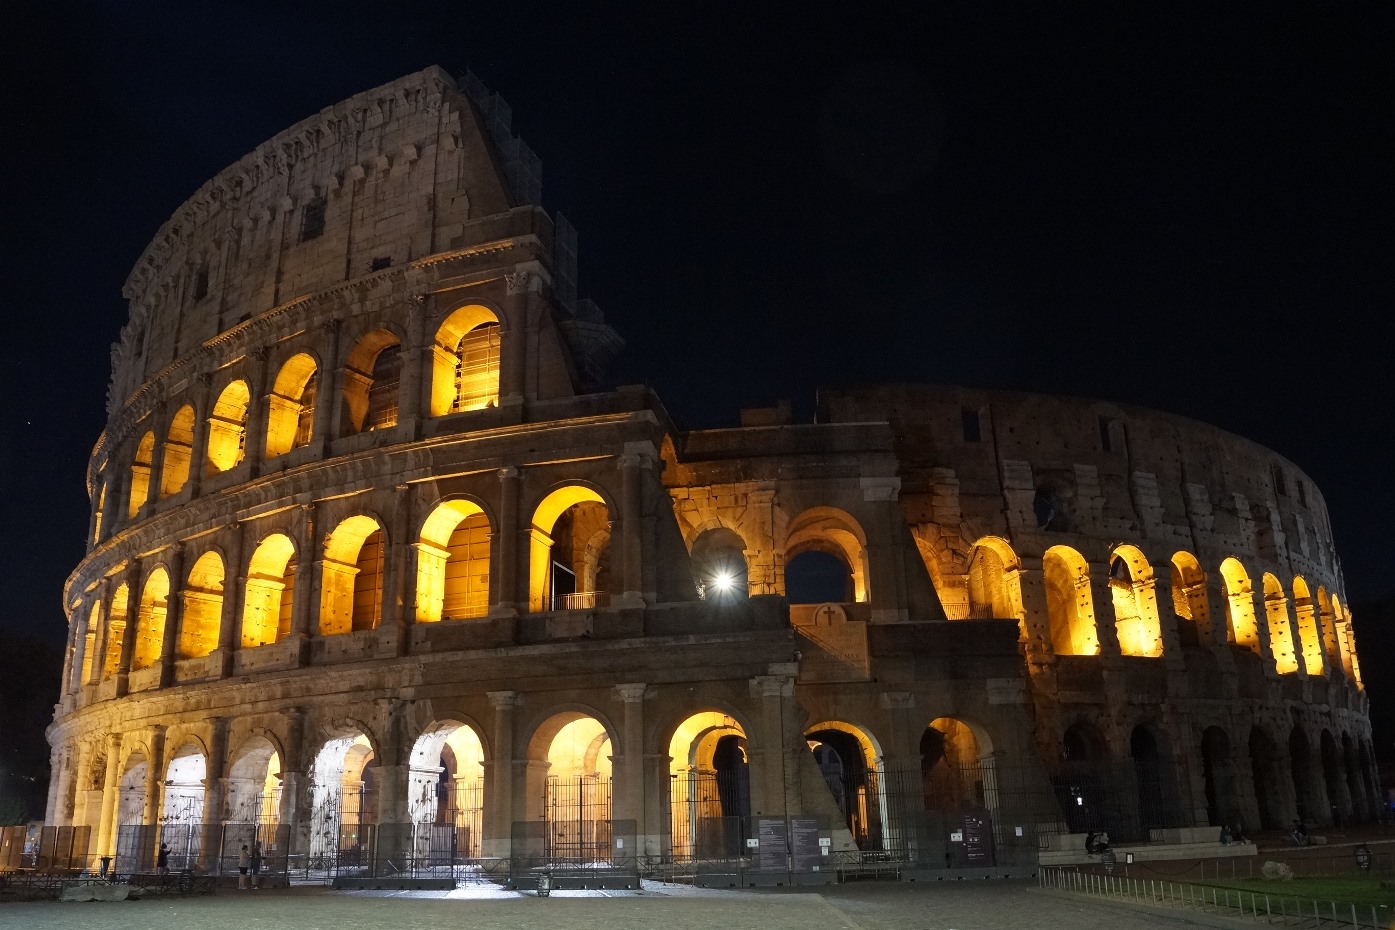 Rome Colosseum Architecture Ruins Italy Europe Ancient History 1395x930